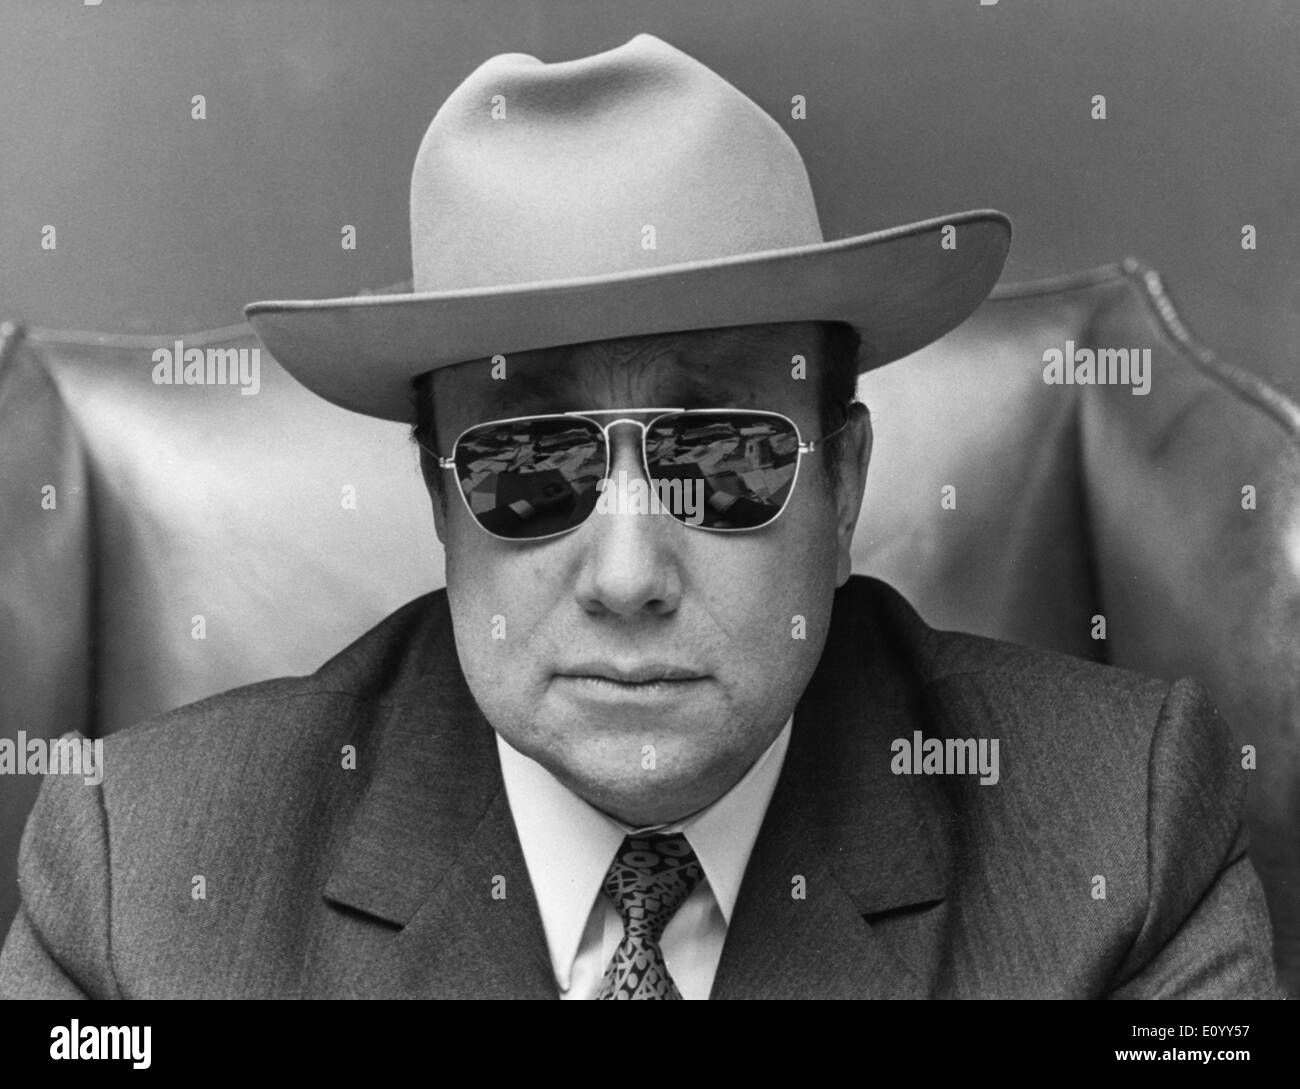 Nov. 3, 1971 - JEAN-PIERRE MELVILLE wearing a cowboy hat and sunglasses. Stock Photo